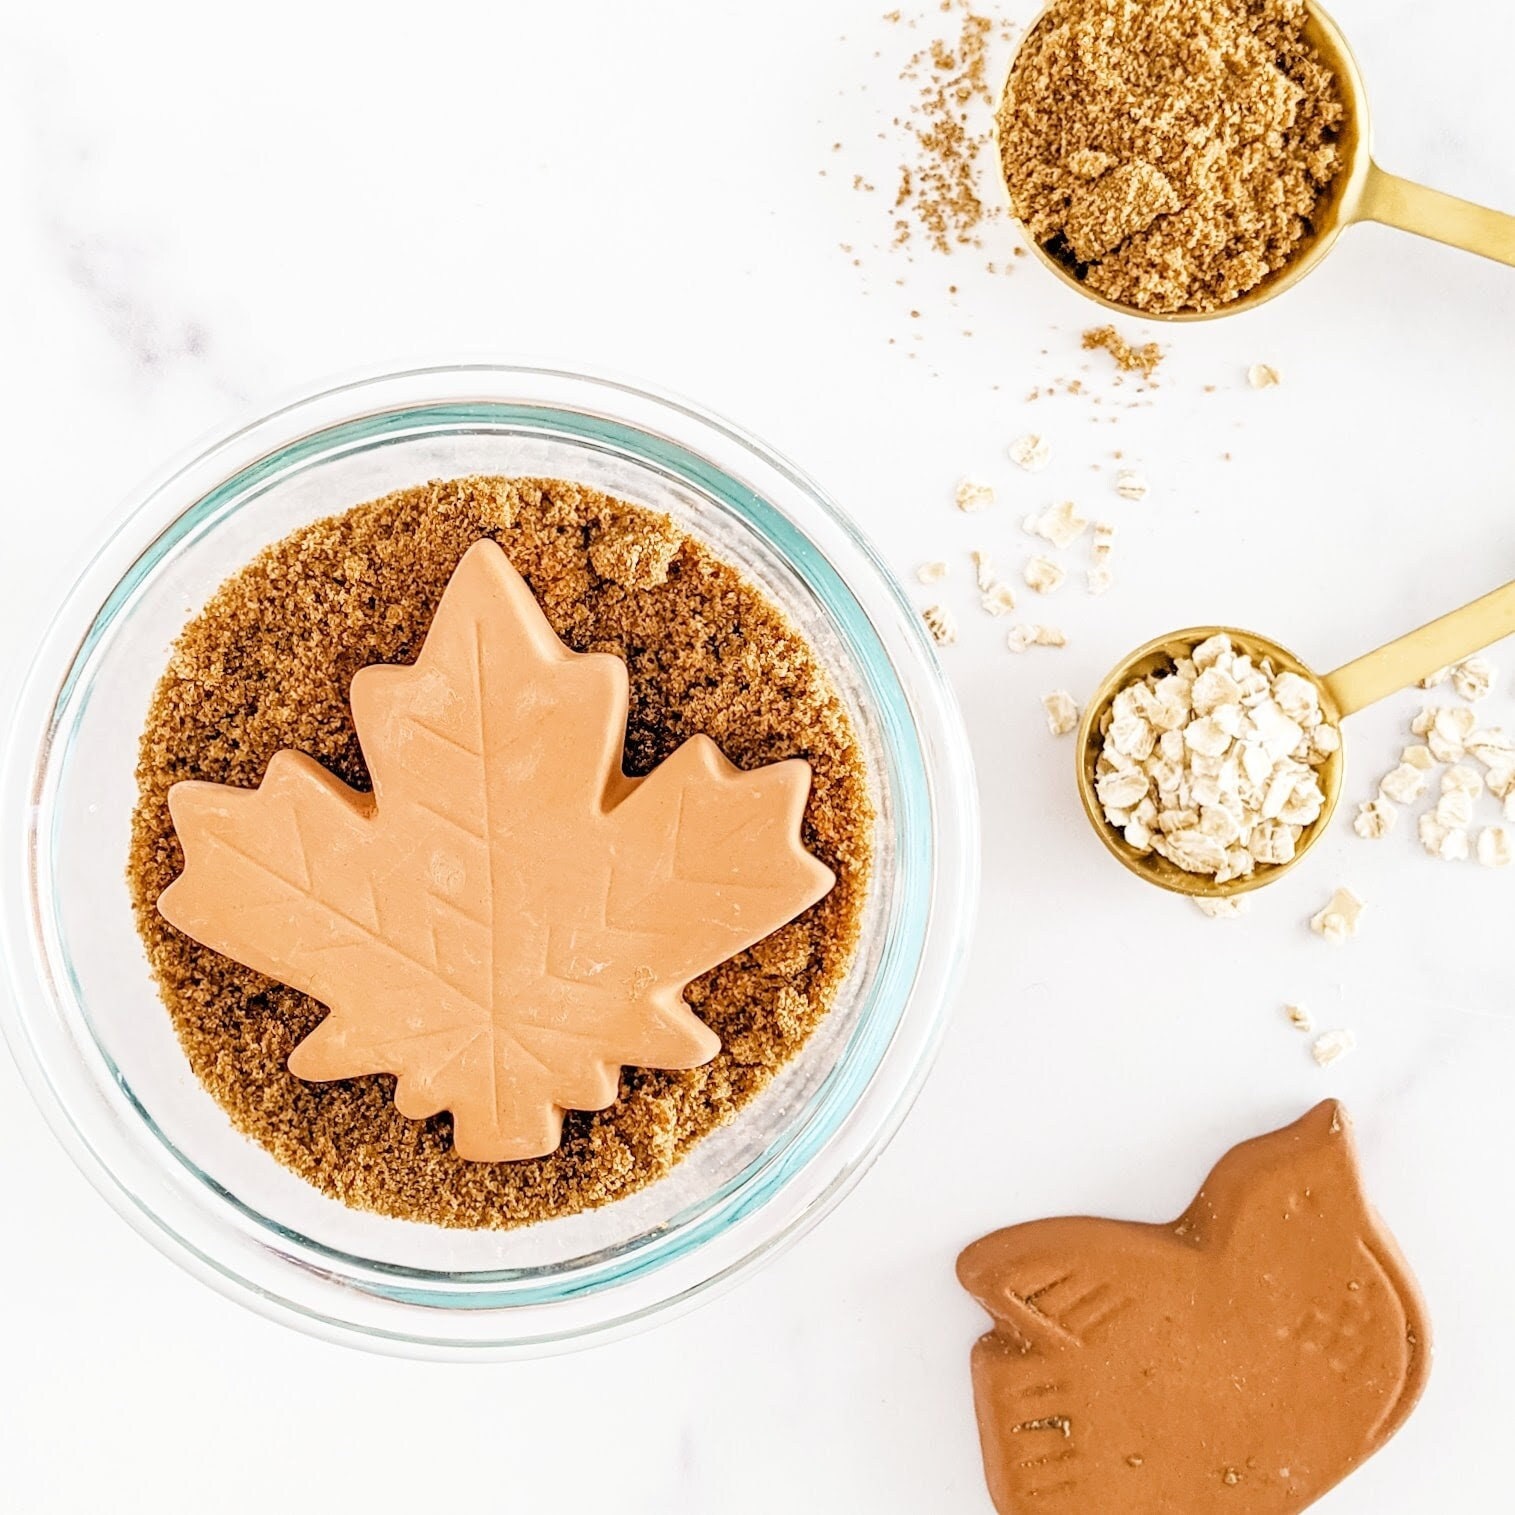 Terra Cotta Brown Sugar Saver, Food-Safe Sugar Preserver for Long-Term Use,  Brown Sugar Softener for Cookies, Dried Fruits, & Marshmallows, Maple Leaf